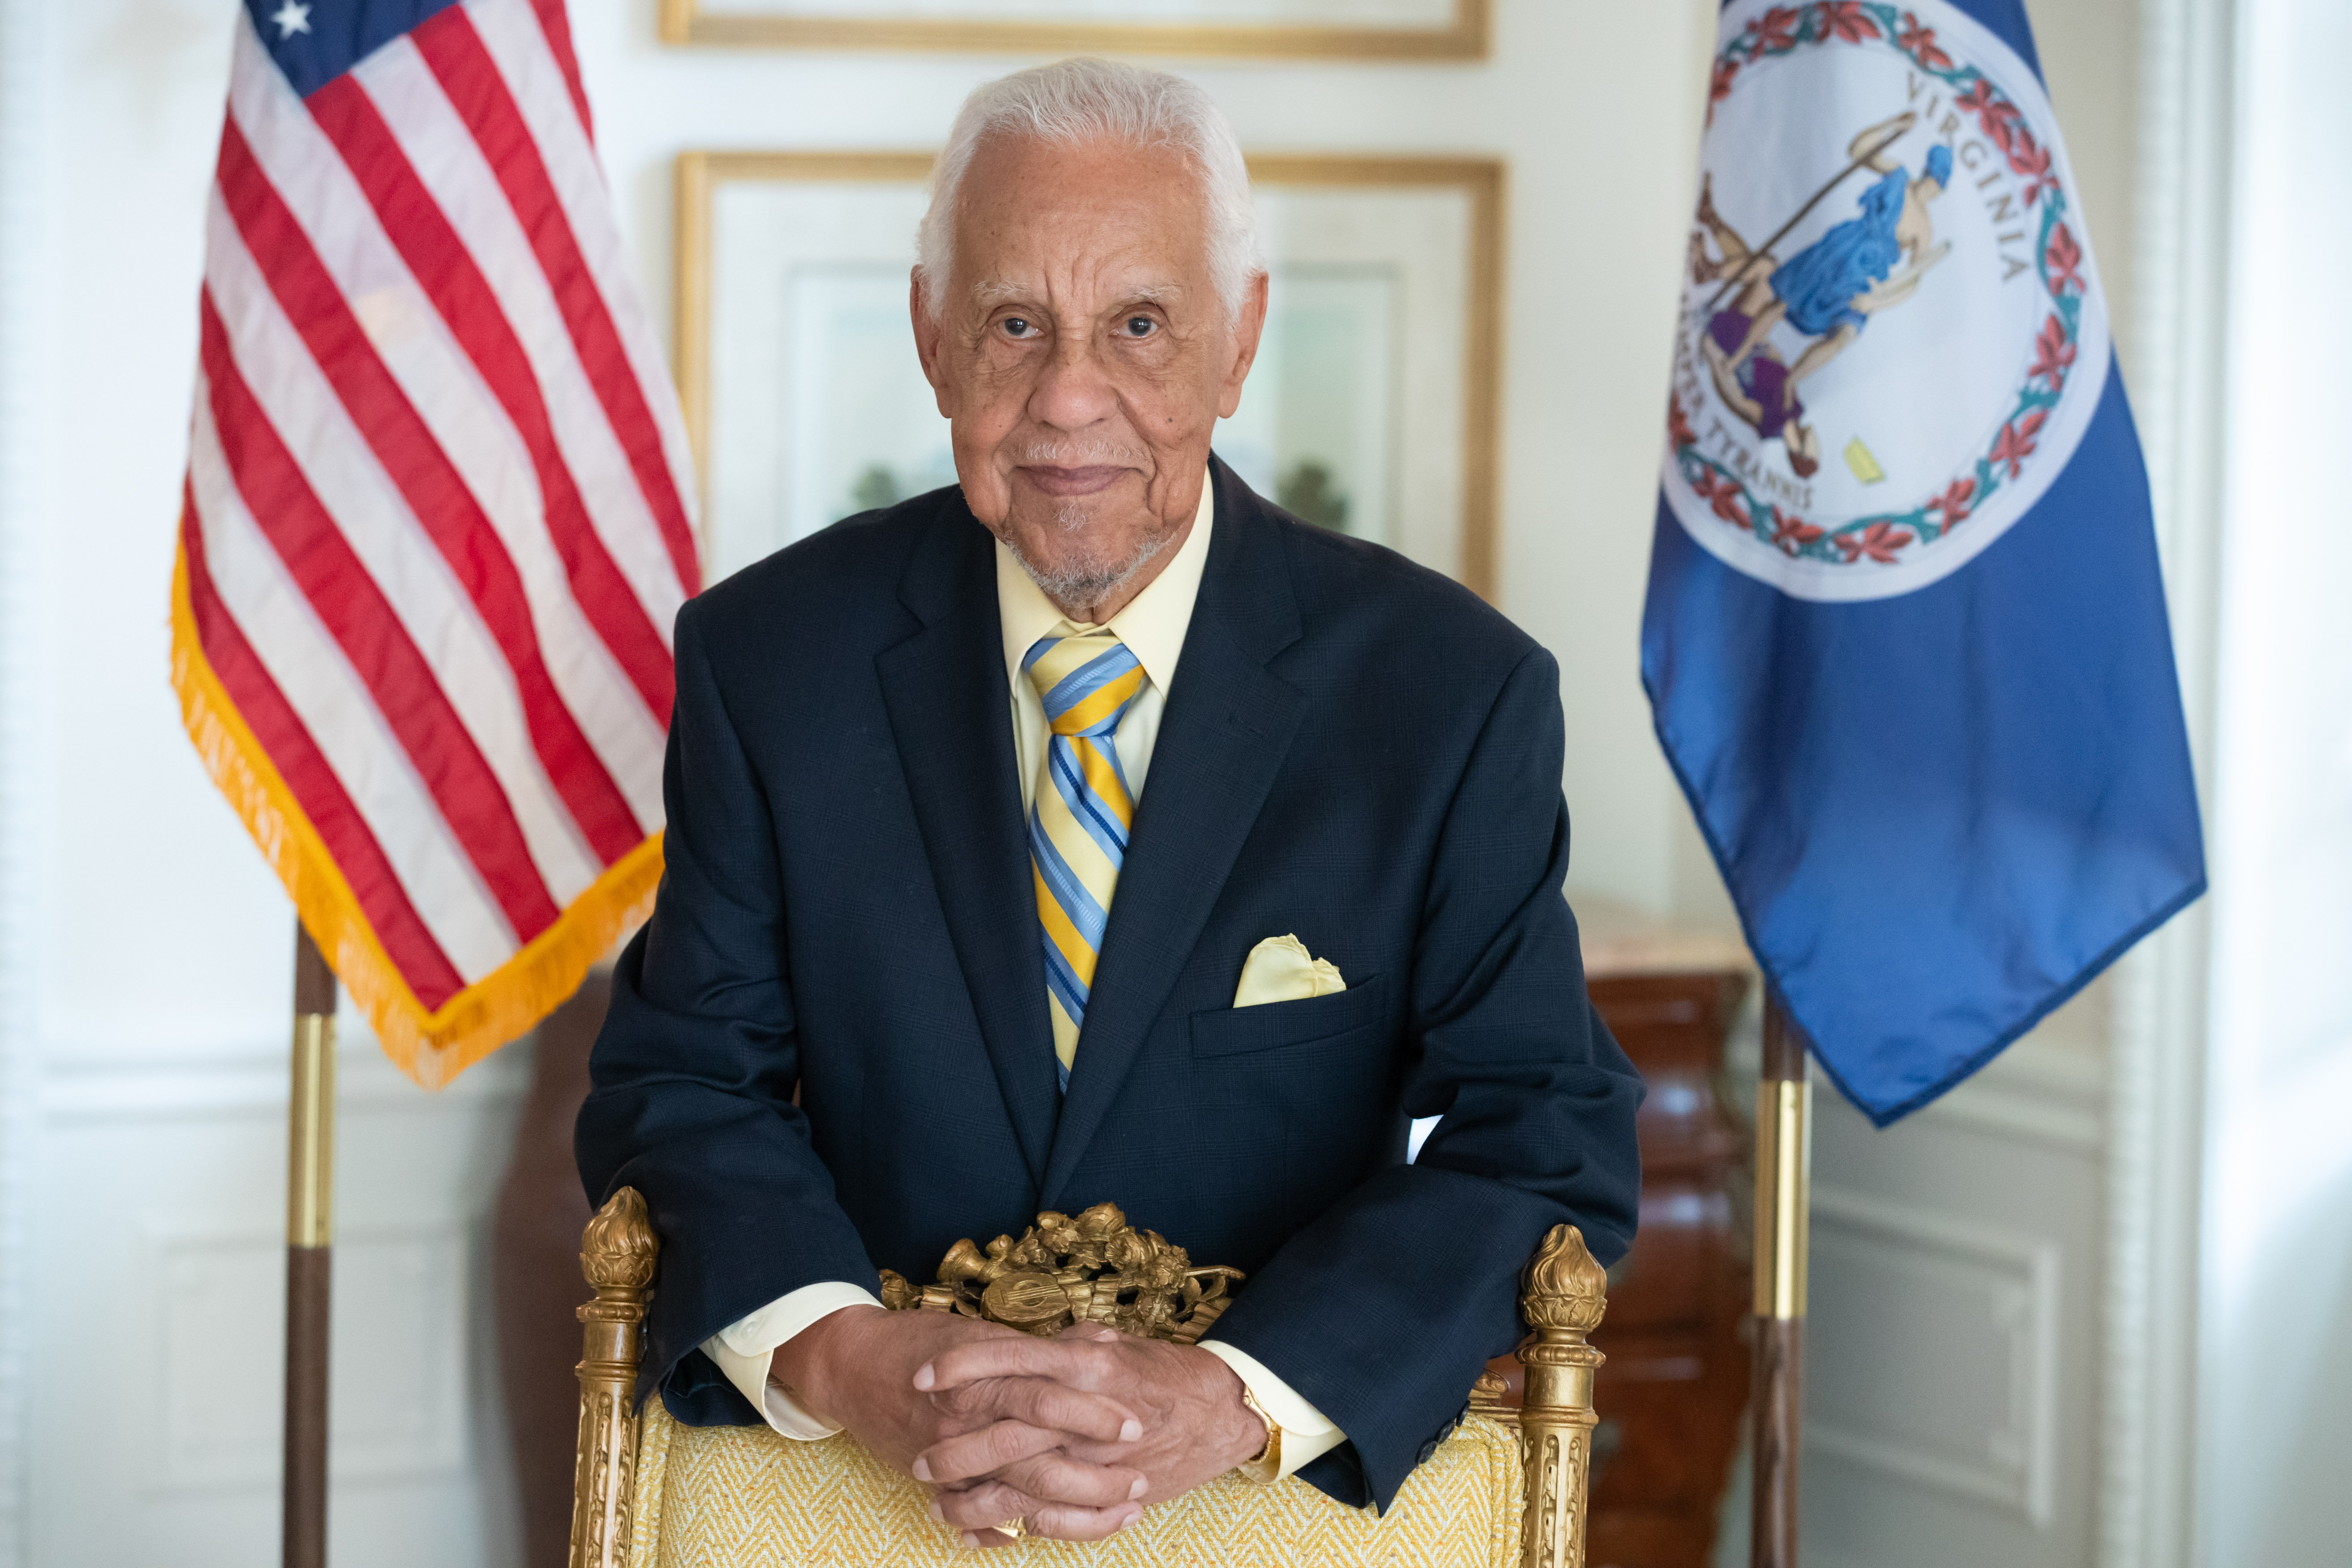 66th Governor of Virginia, L. Douglas Wilder symbolizes the pinnacle of public service as the first elected African-American in the United States.